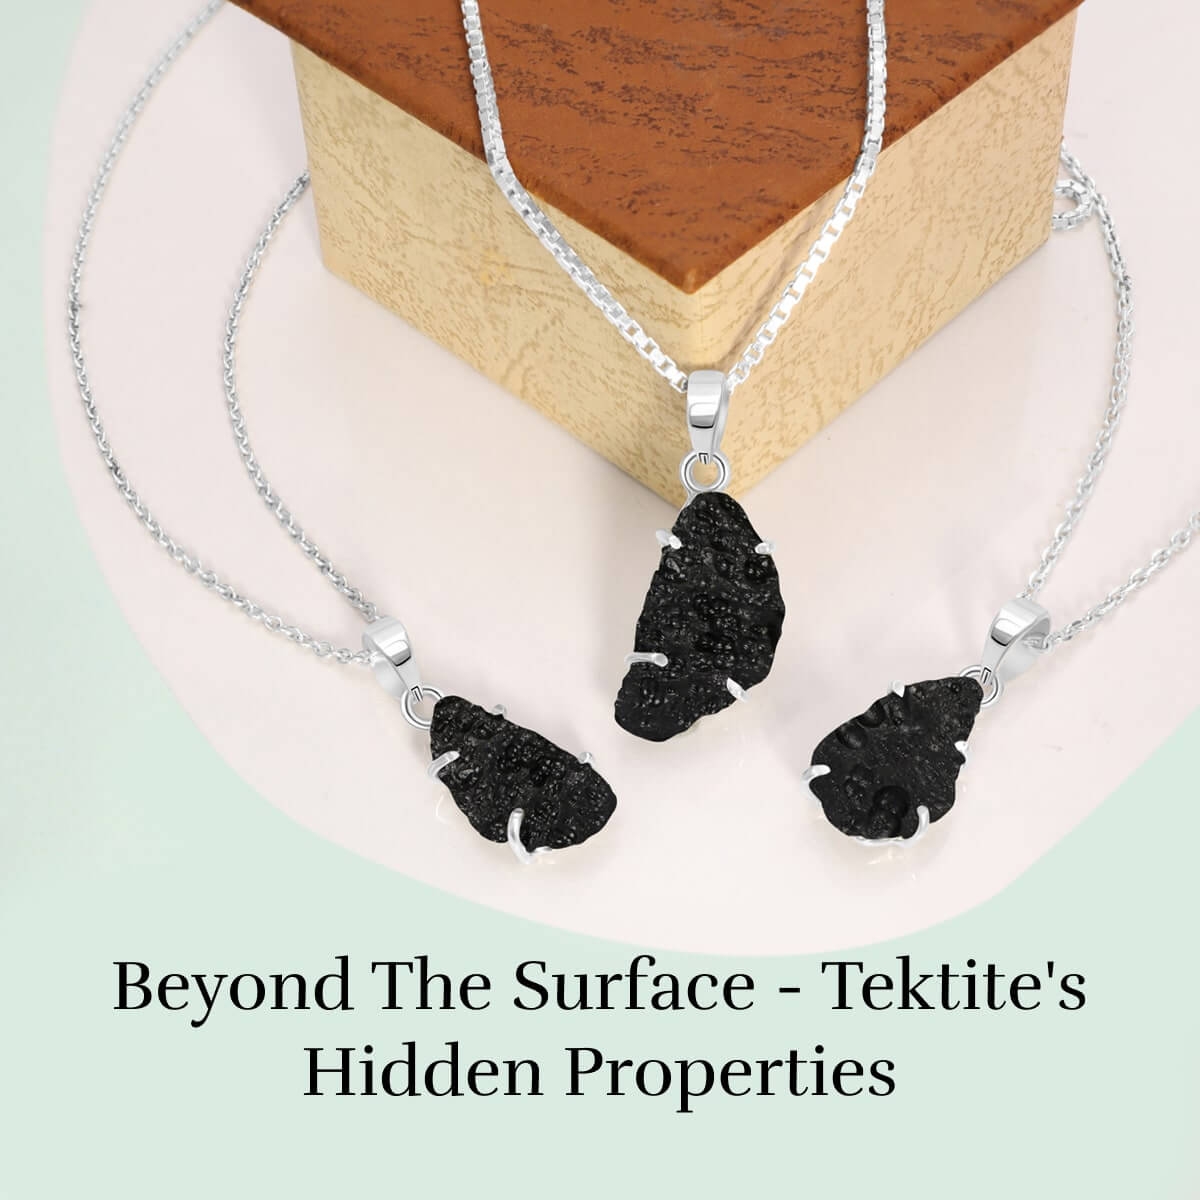 Tektite Physical and chemical Properties